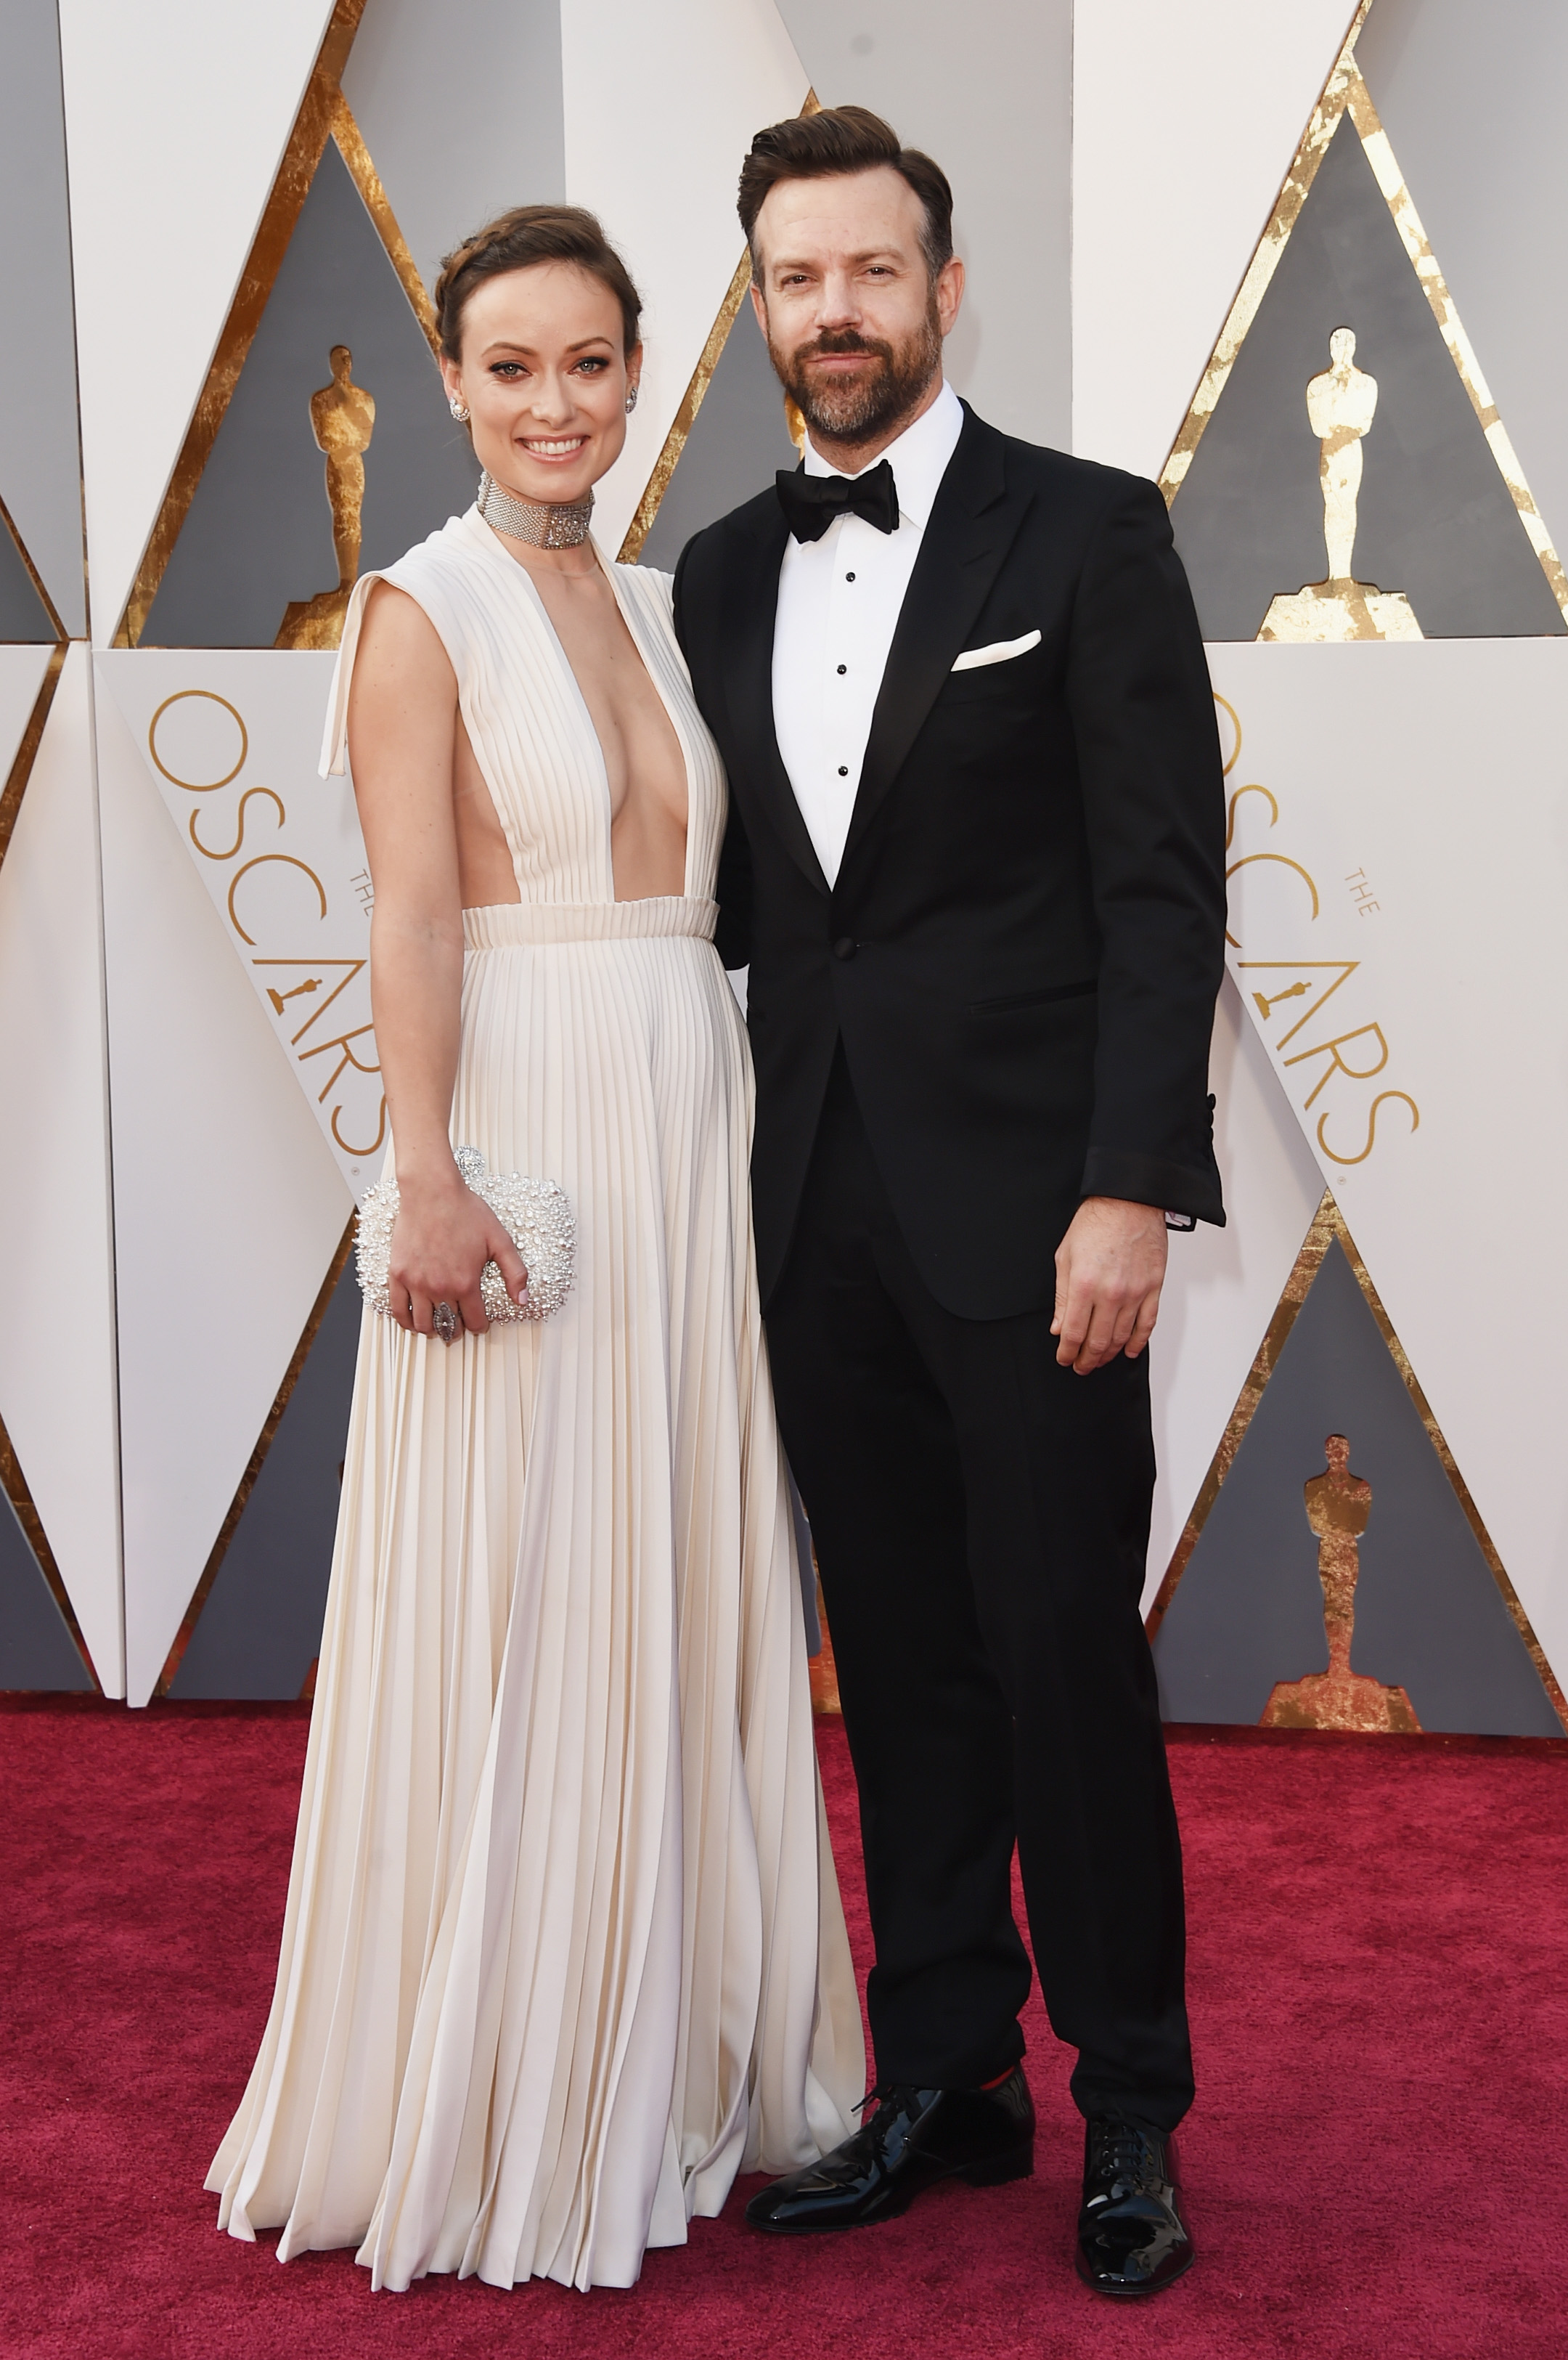 Olivia Wilde and Jason Sudeikis attend the 88th Annual Academy Awards on Feb. 28, 2016 in Hollywood, Calif.